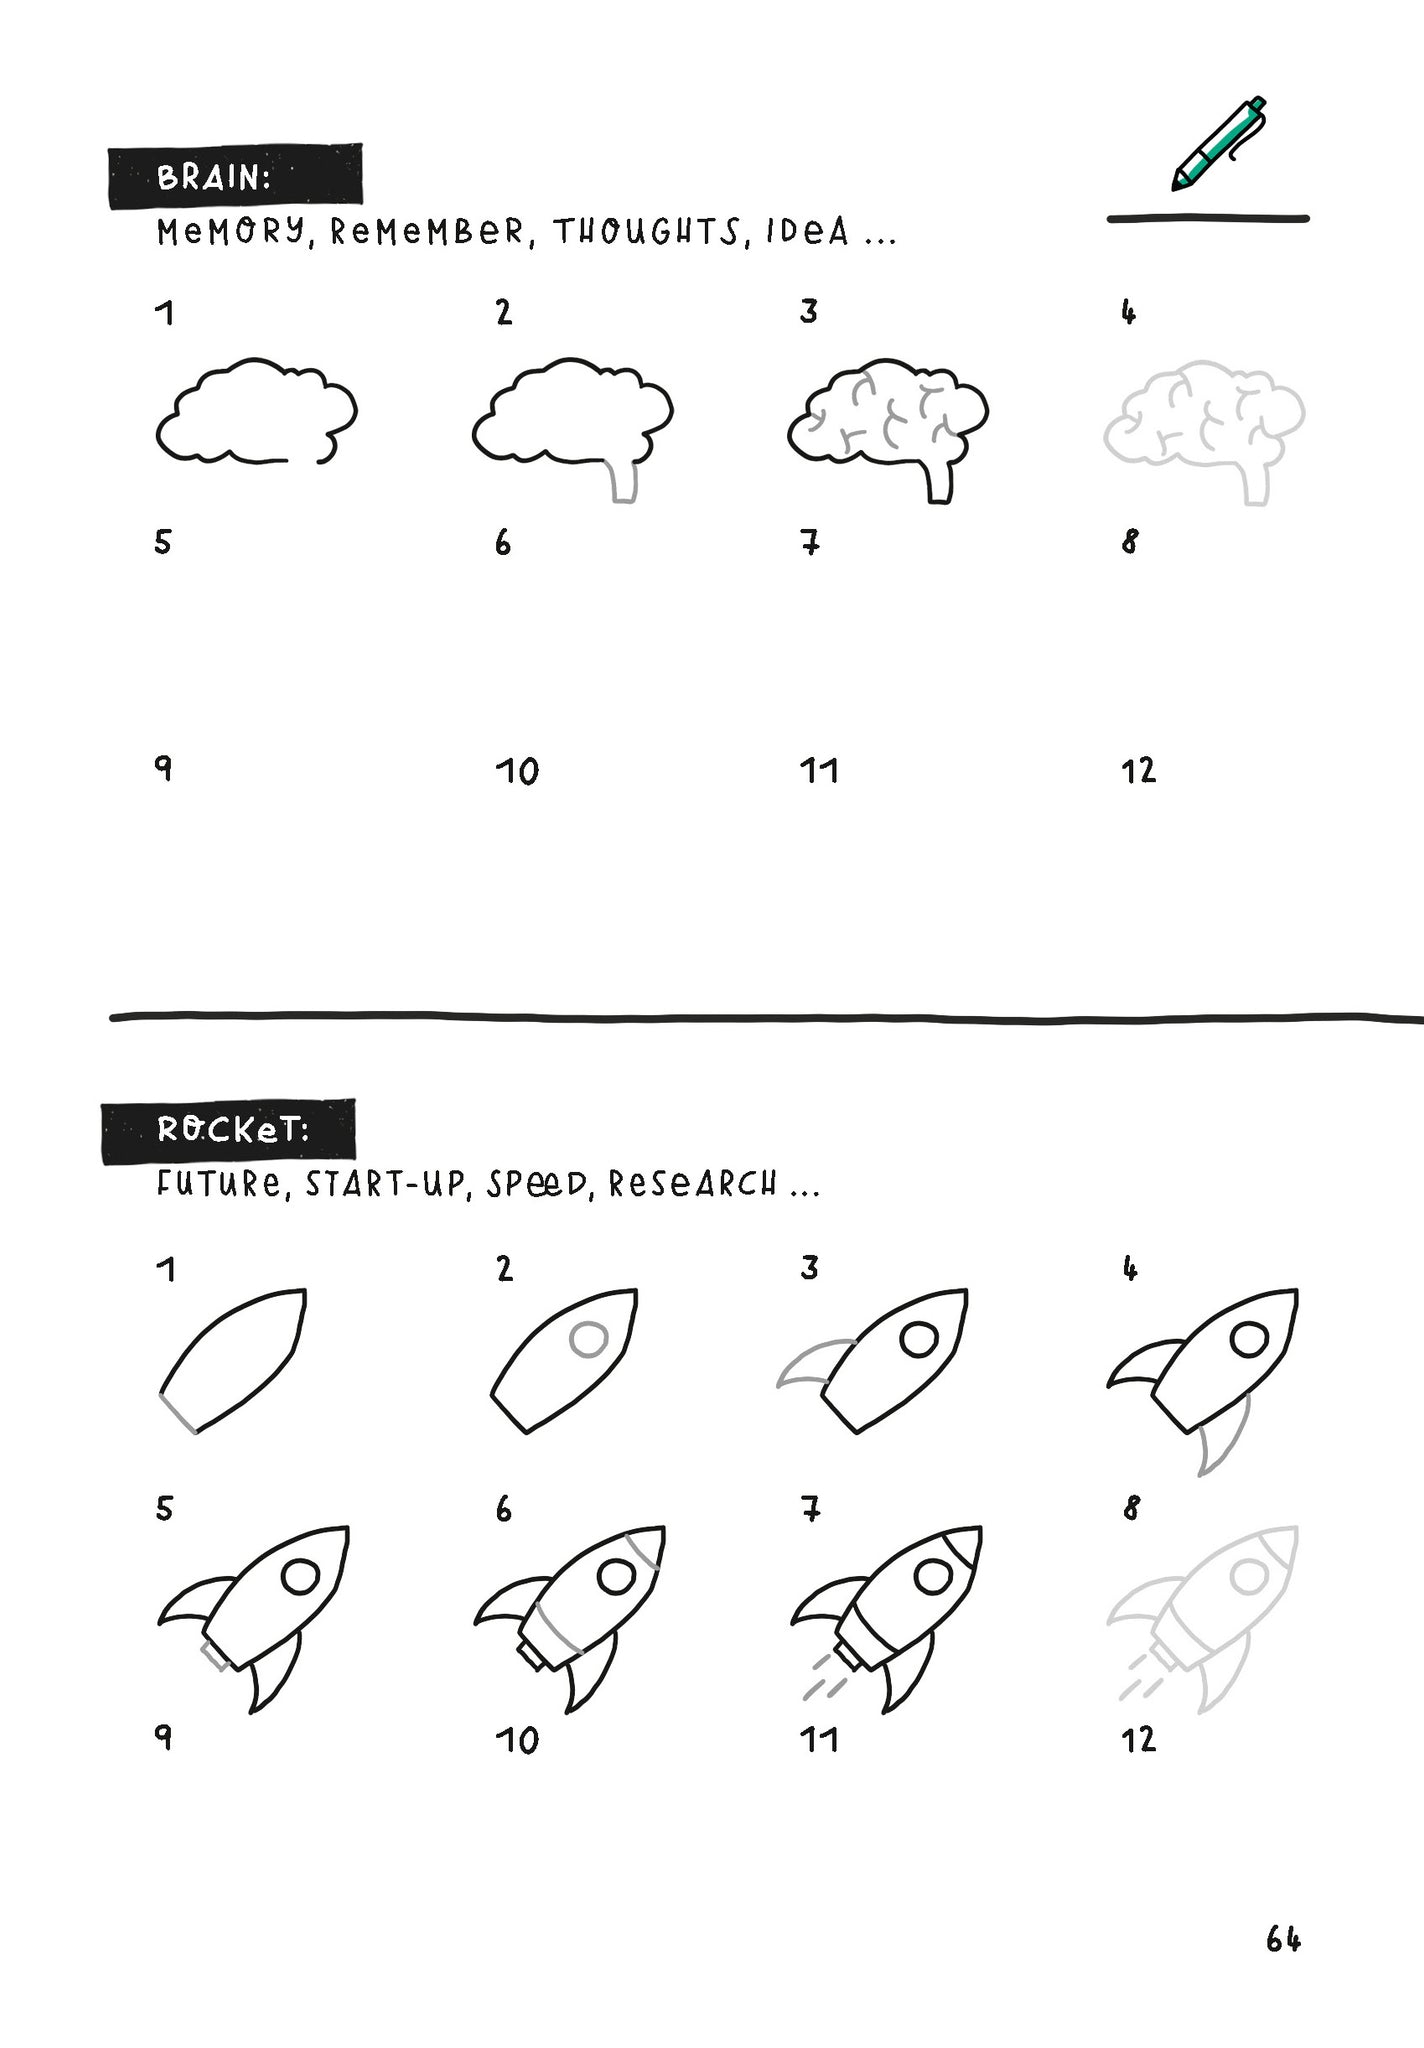 Sketchnote Journal Preview: Draw symbols lstep by step